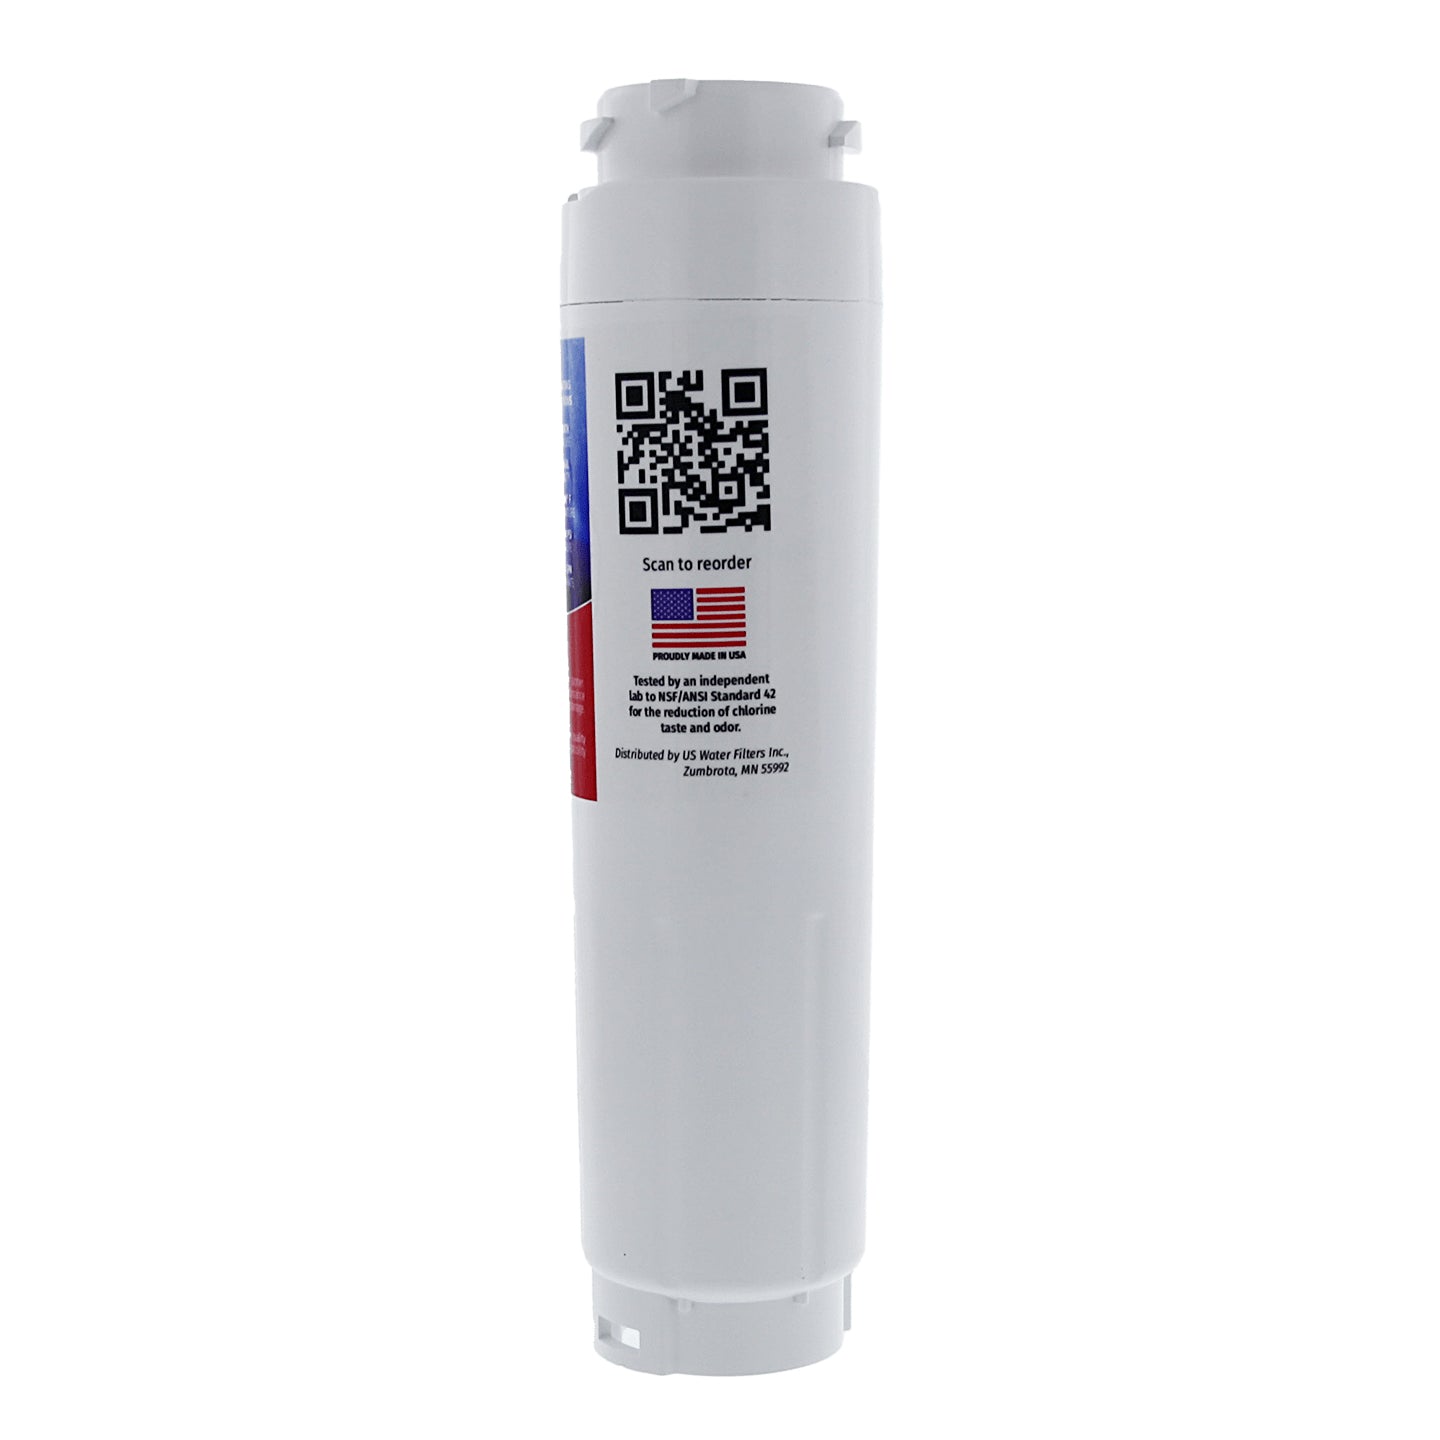 644845 / UltraClarity REPLFLTR10 Bosch Comparable Refrigerator Water Filter Replacement By USWF